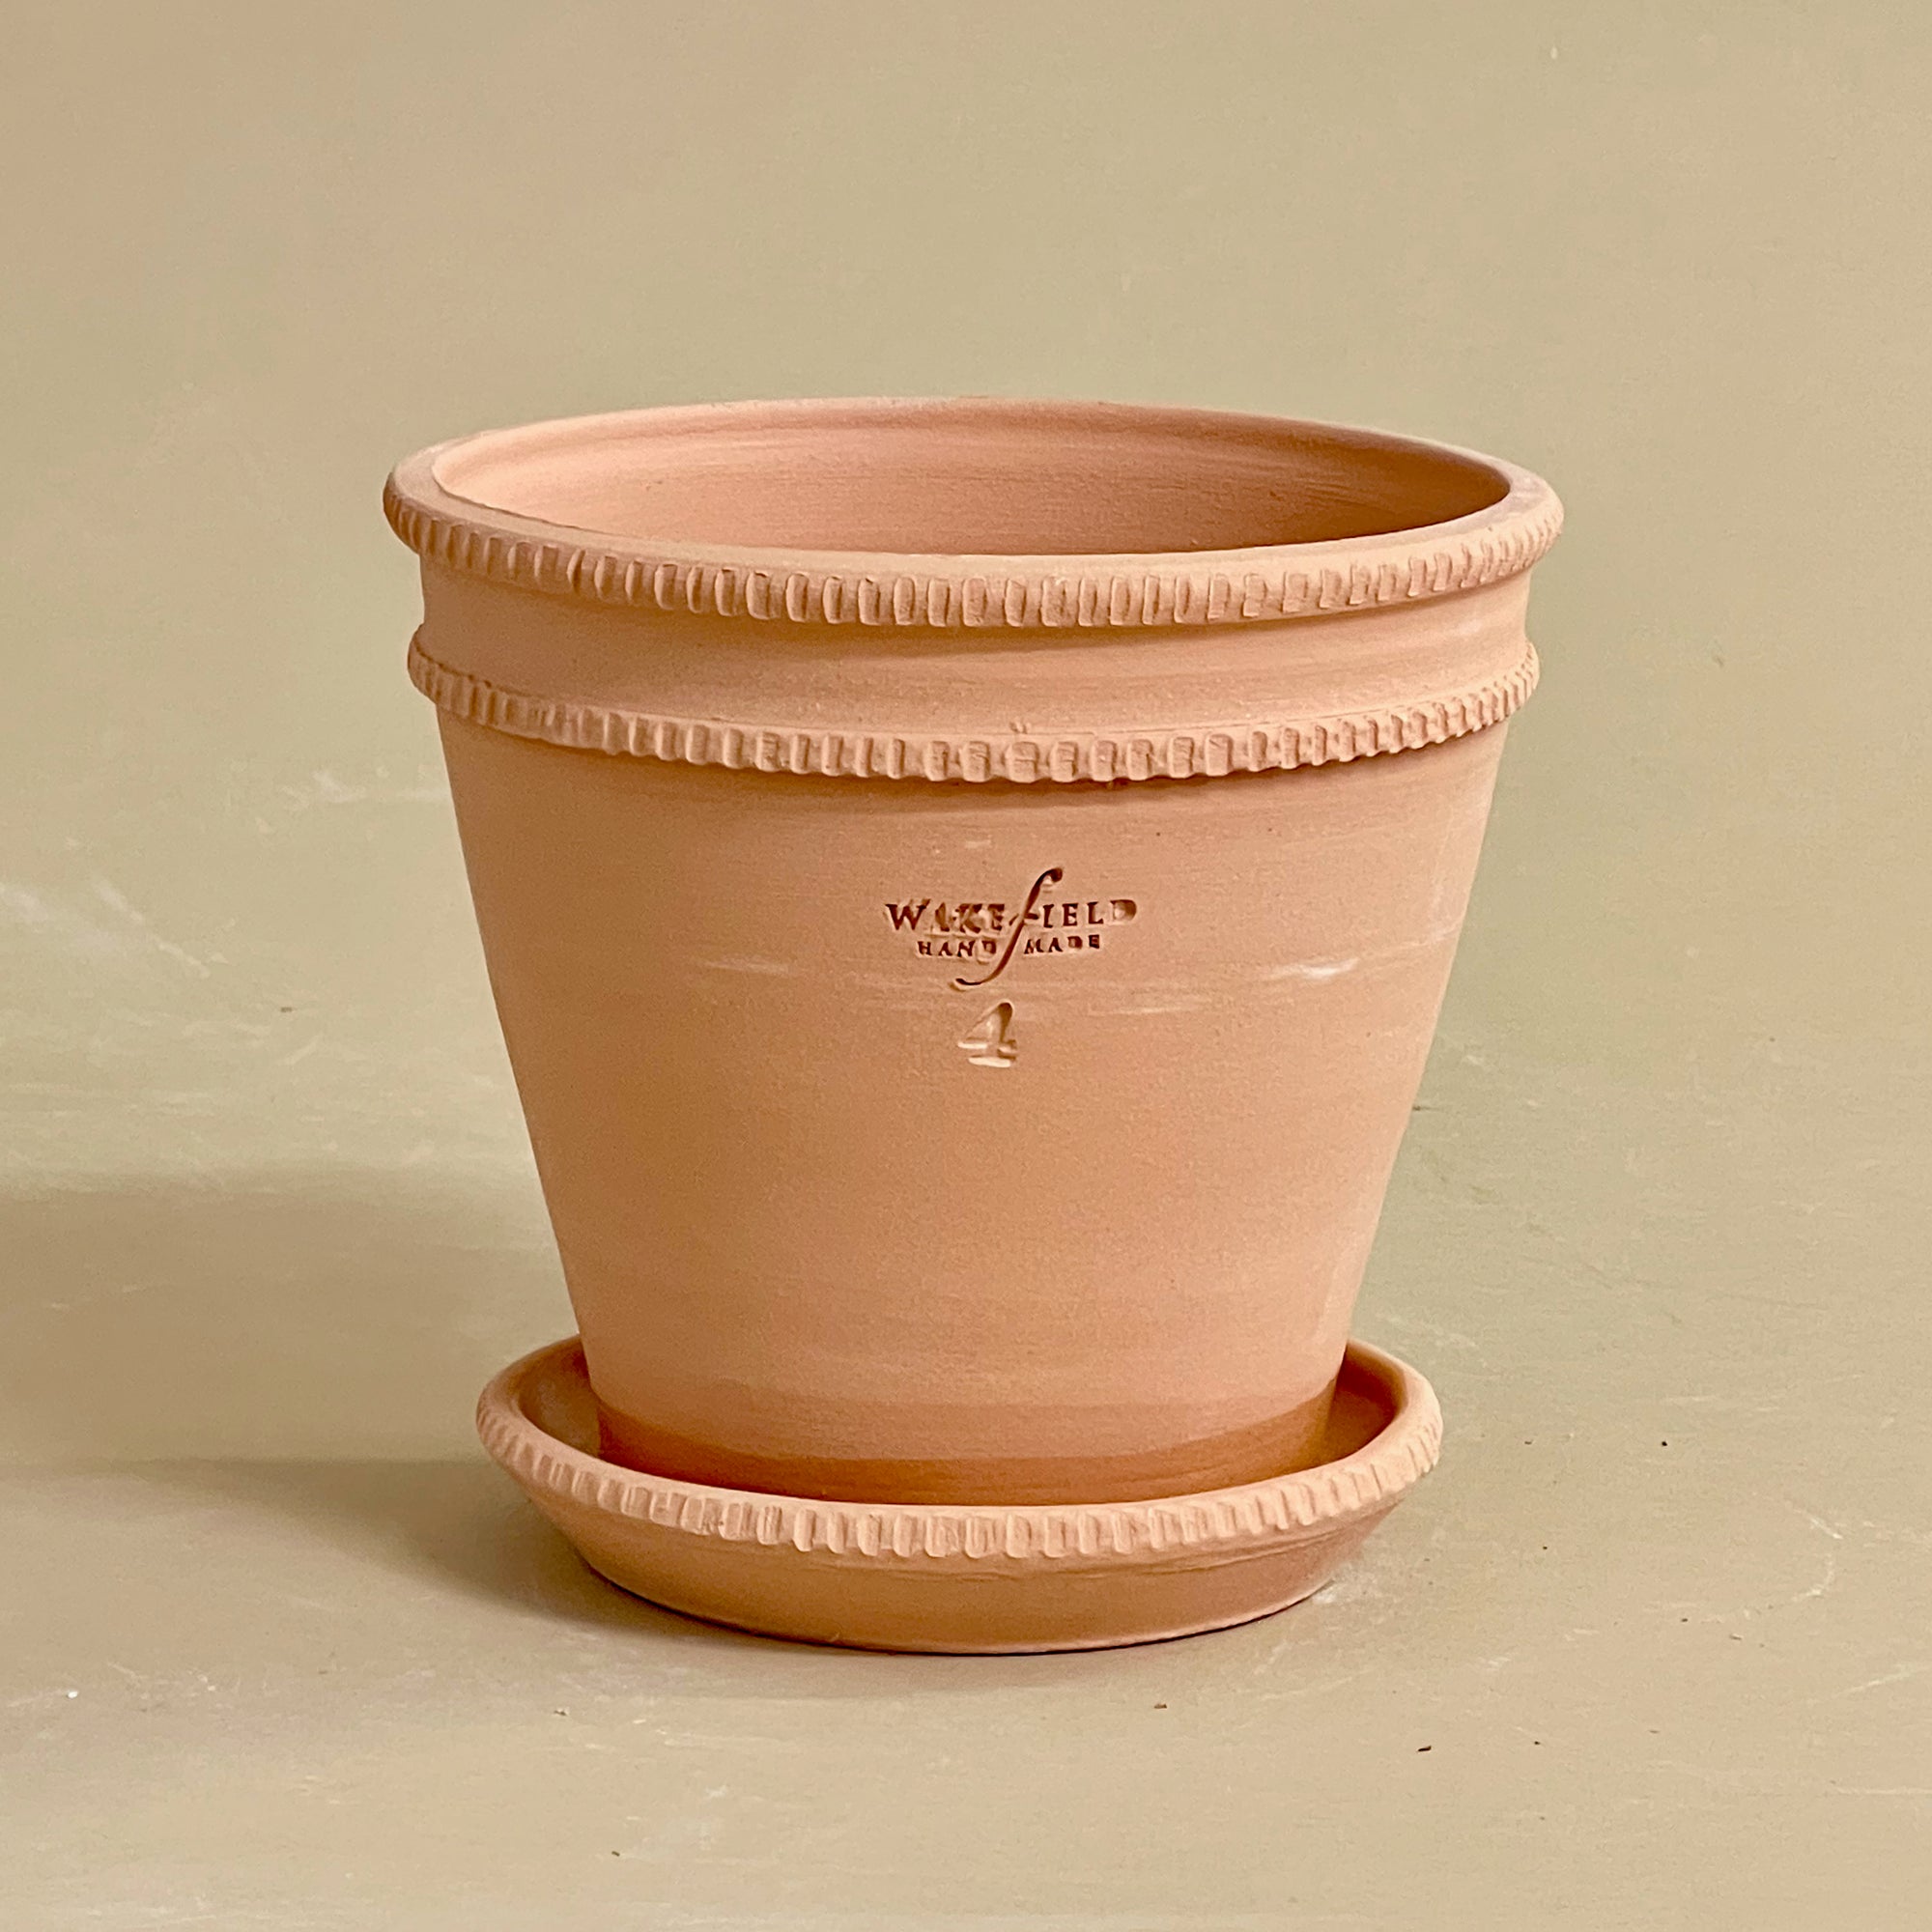 Shenandoah Pot With Attached Saucer